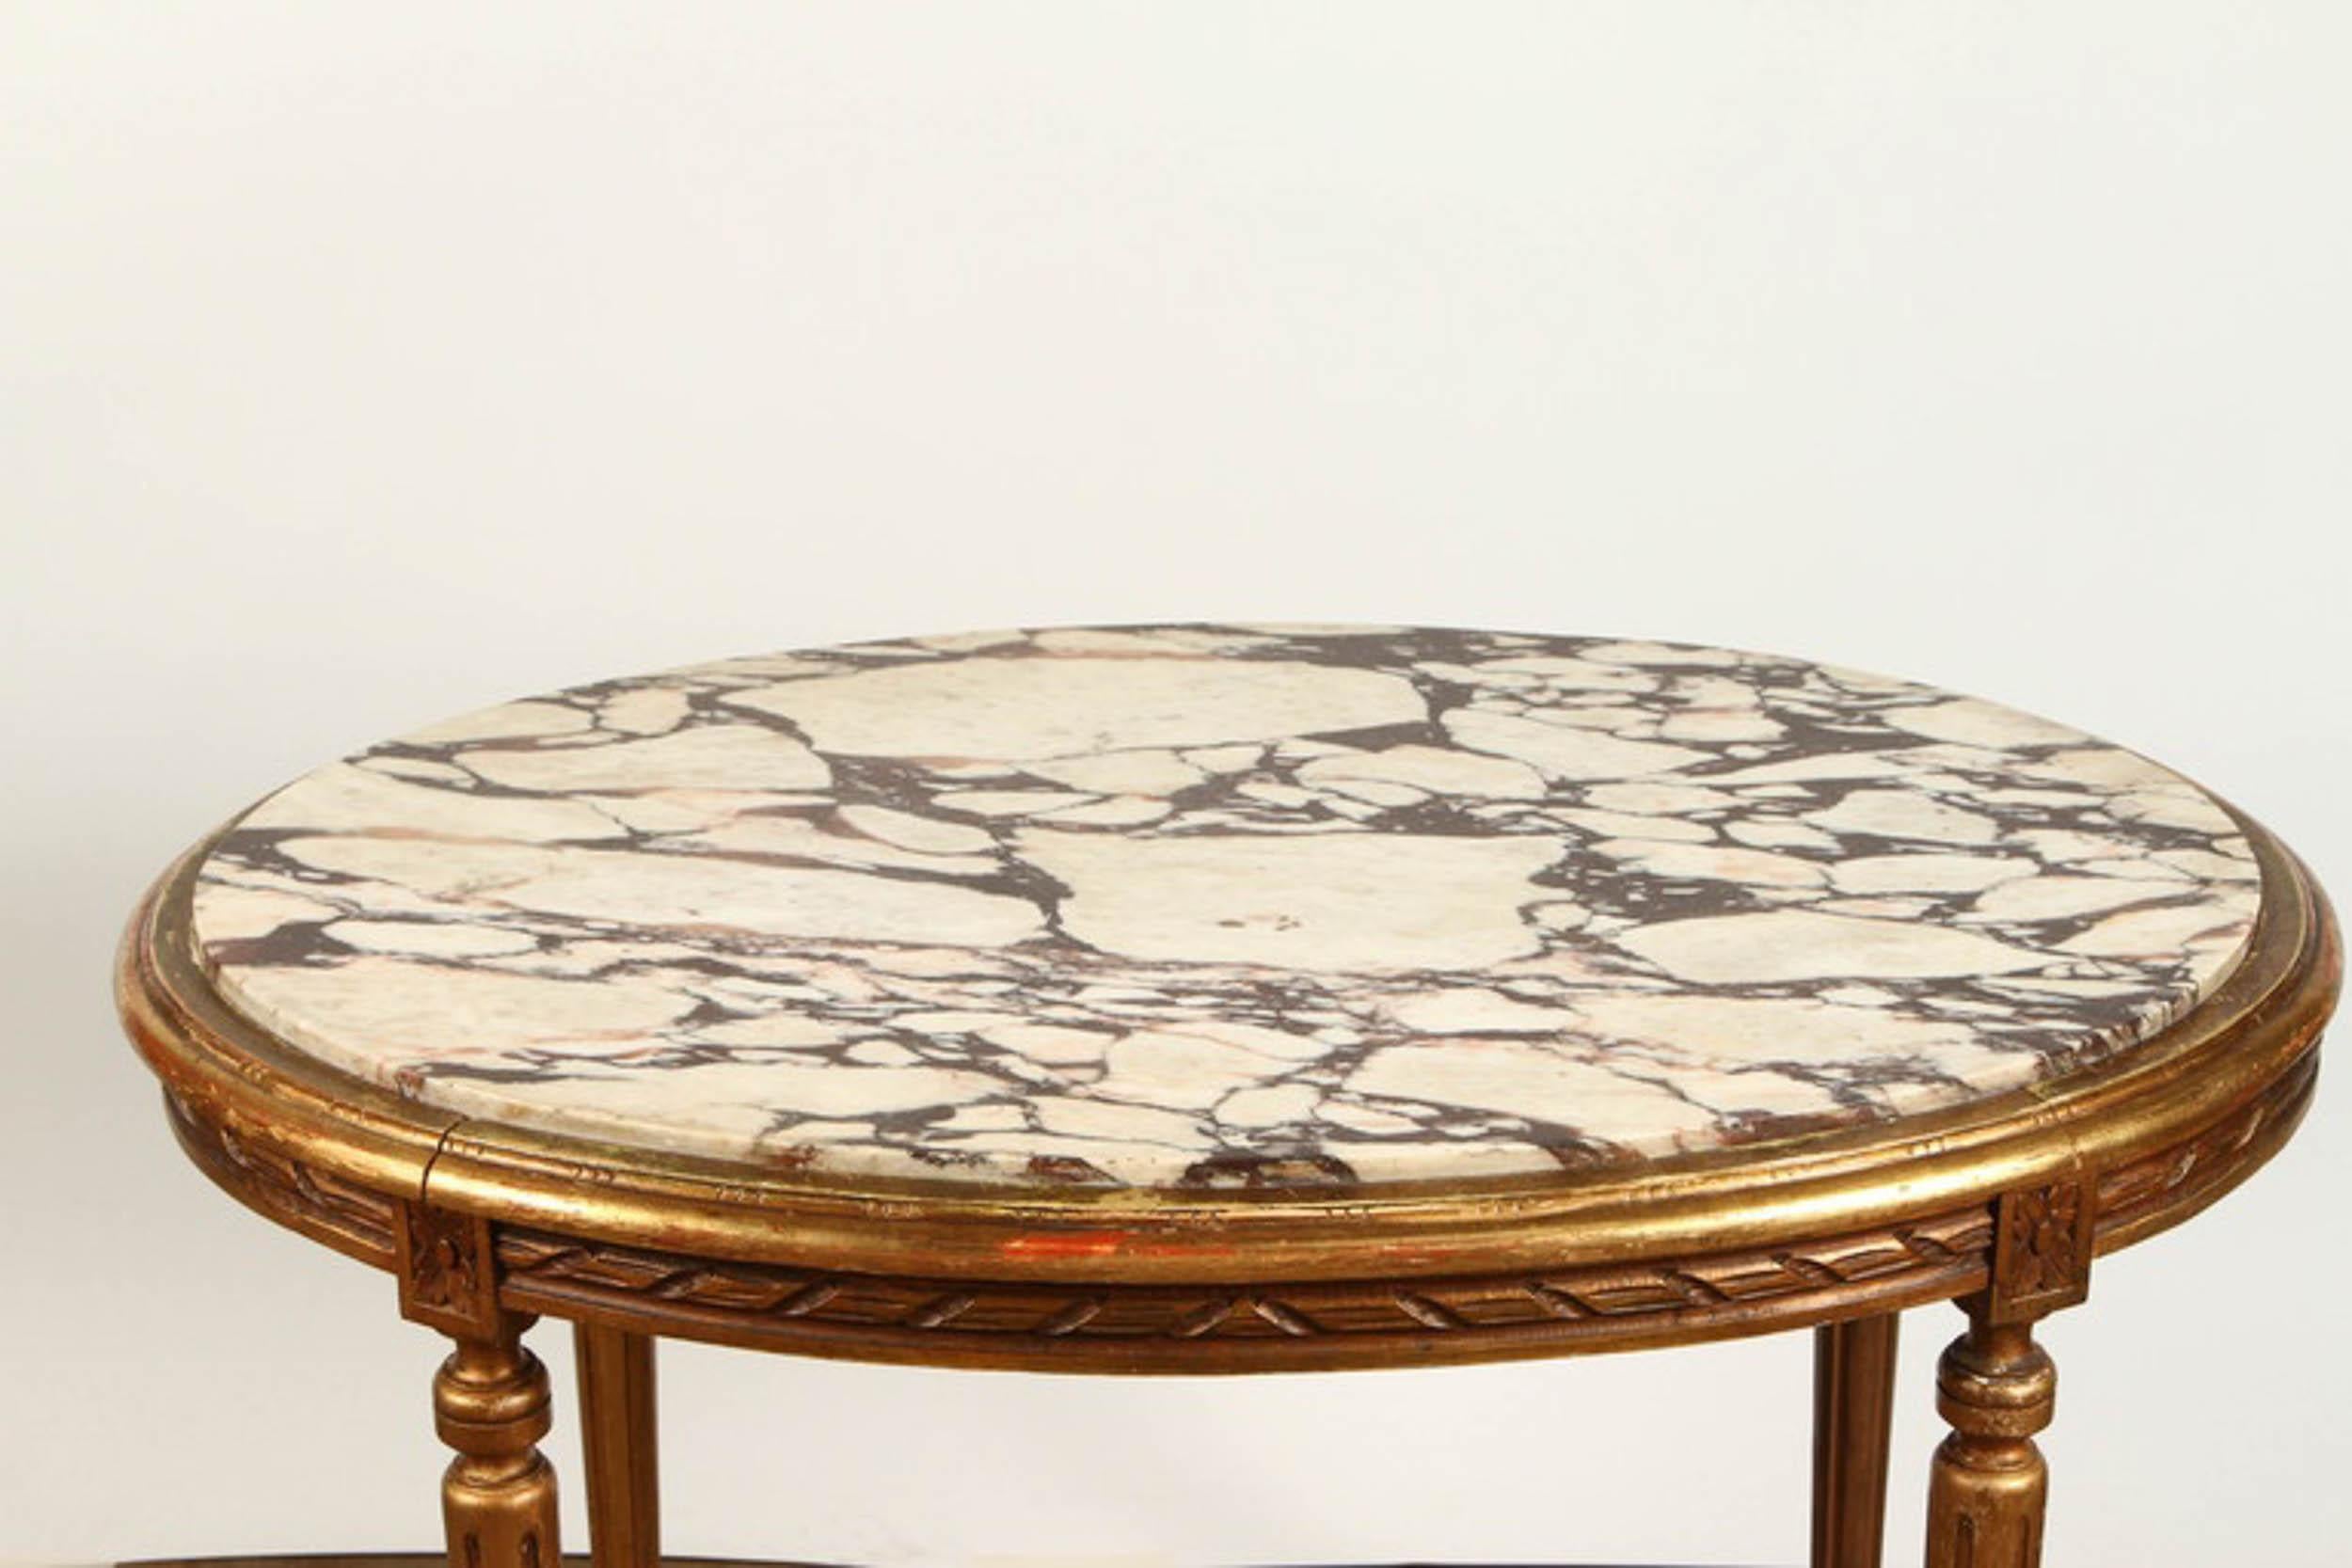 Neoclassical 19th Century French Marble Top Giltwood Oval Coffee Table